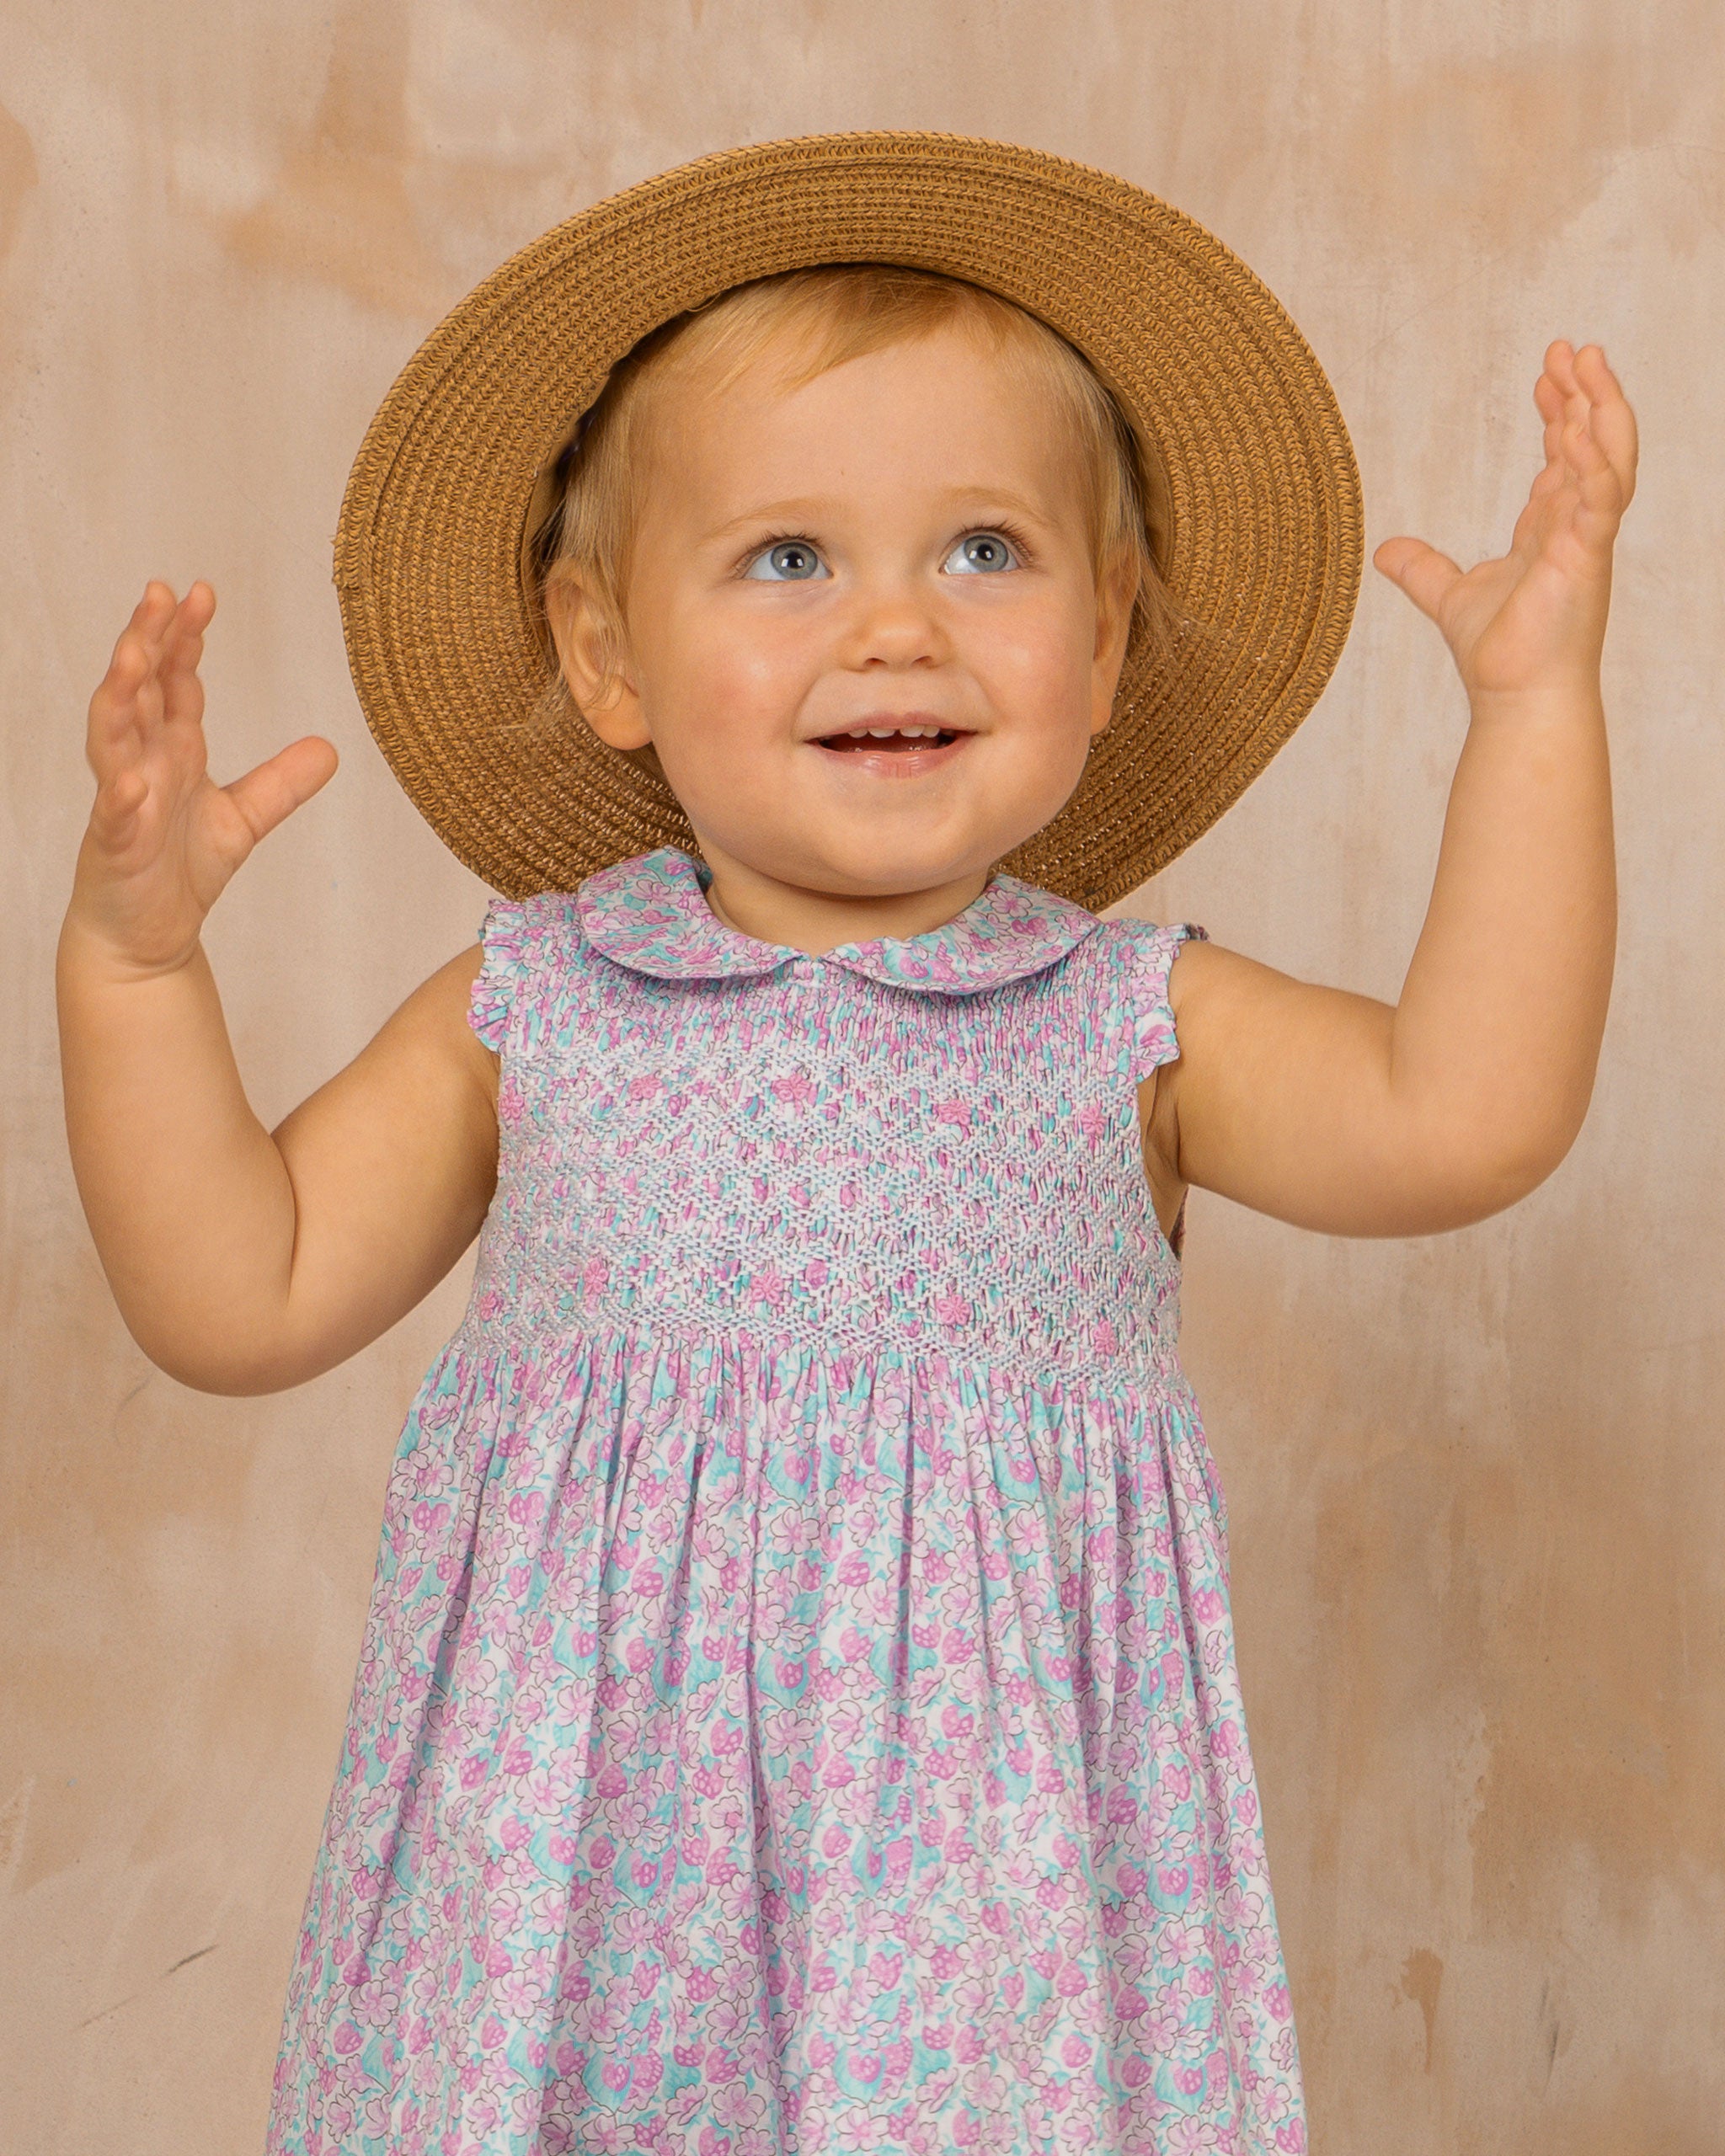 baby in smock dress smiling and wearing a sun hat